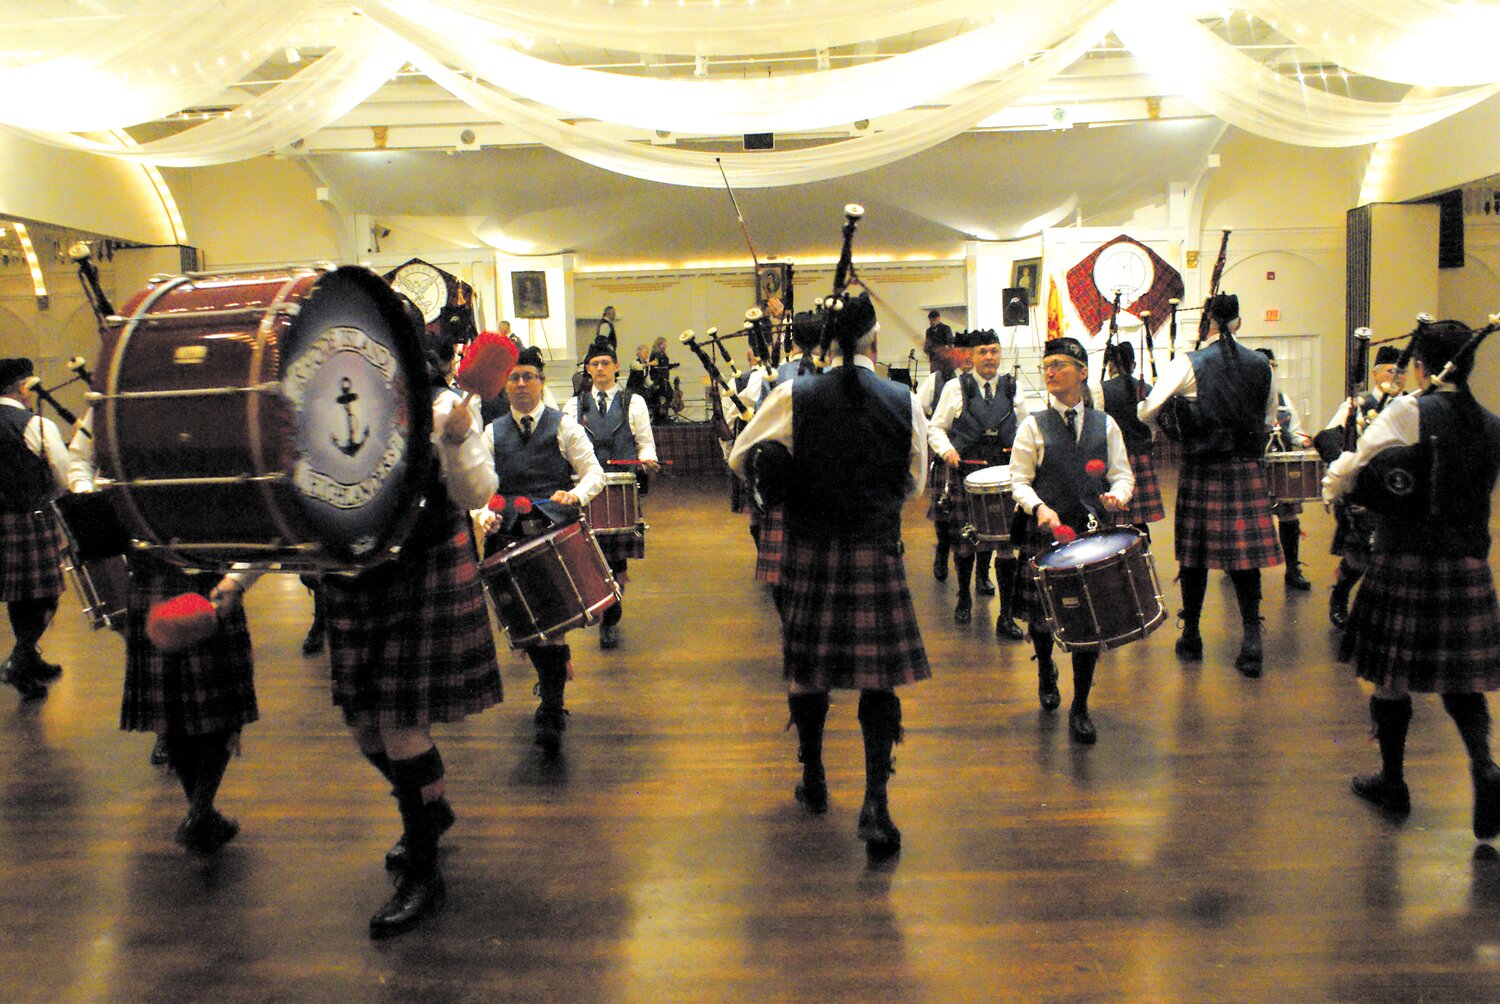 MARCH IN TIME: The Rhode Island Highlanders give an exhibition in a cleared out main hall of Rhodes on the Pawtuxet.